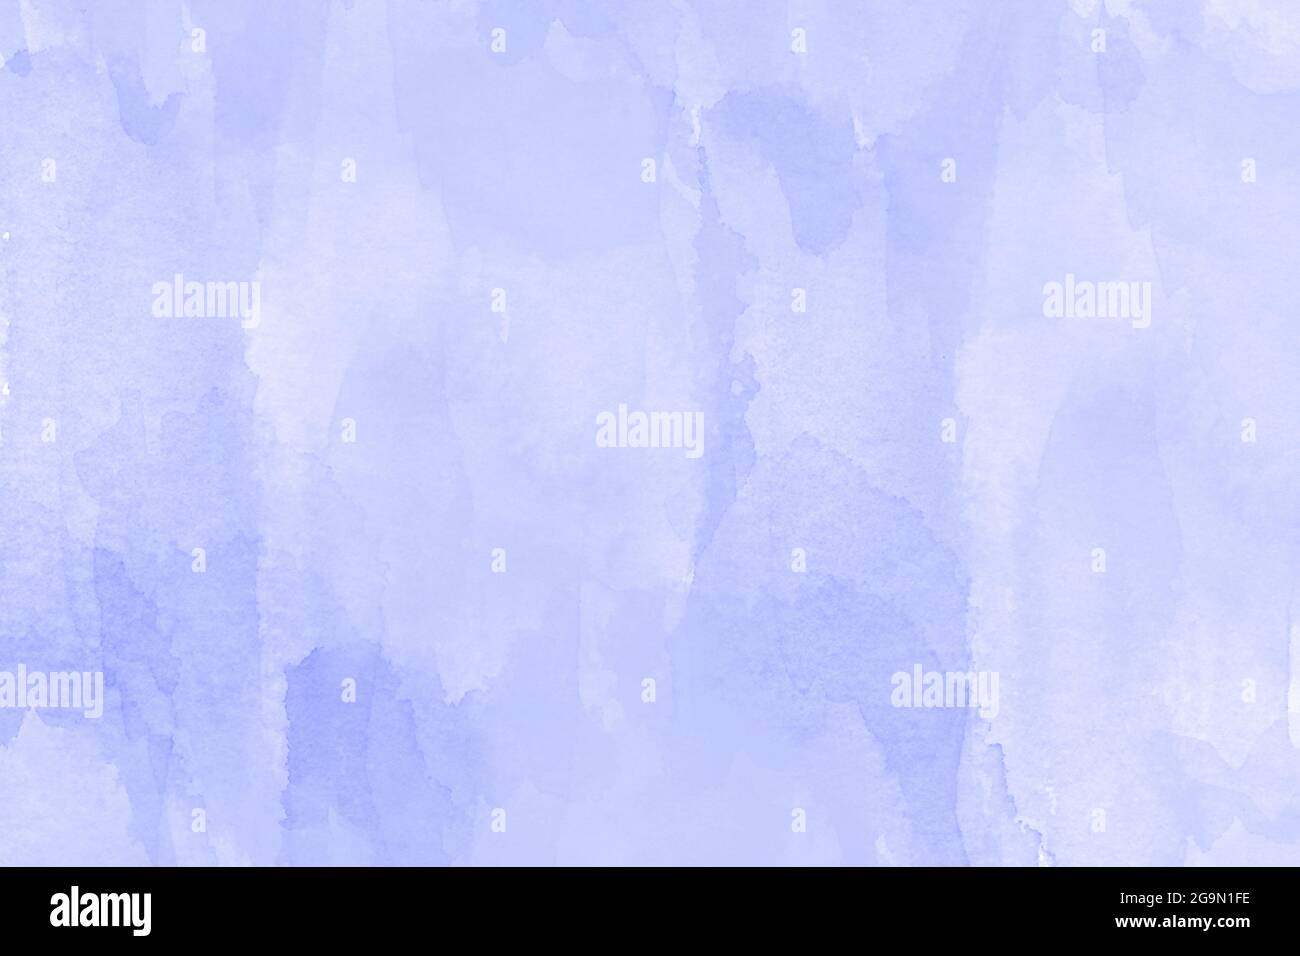 Abstract blue creative watercolor background Stock Photo